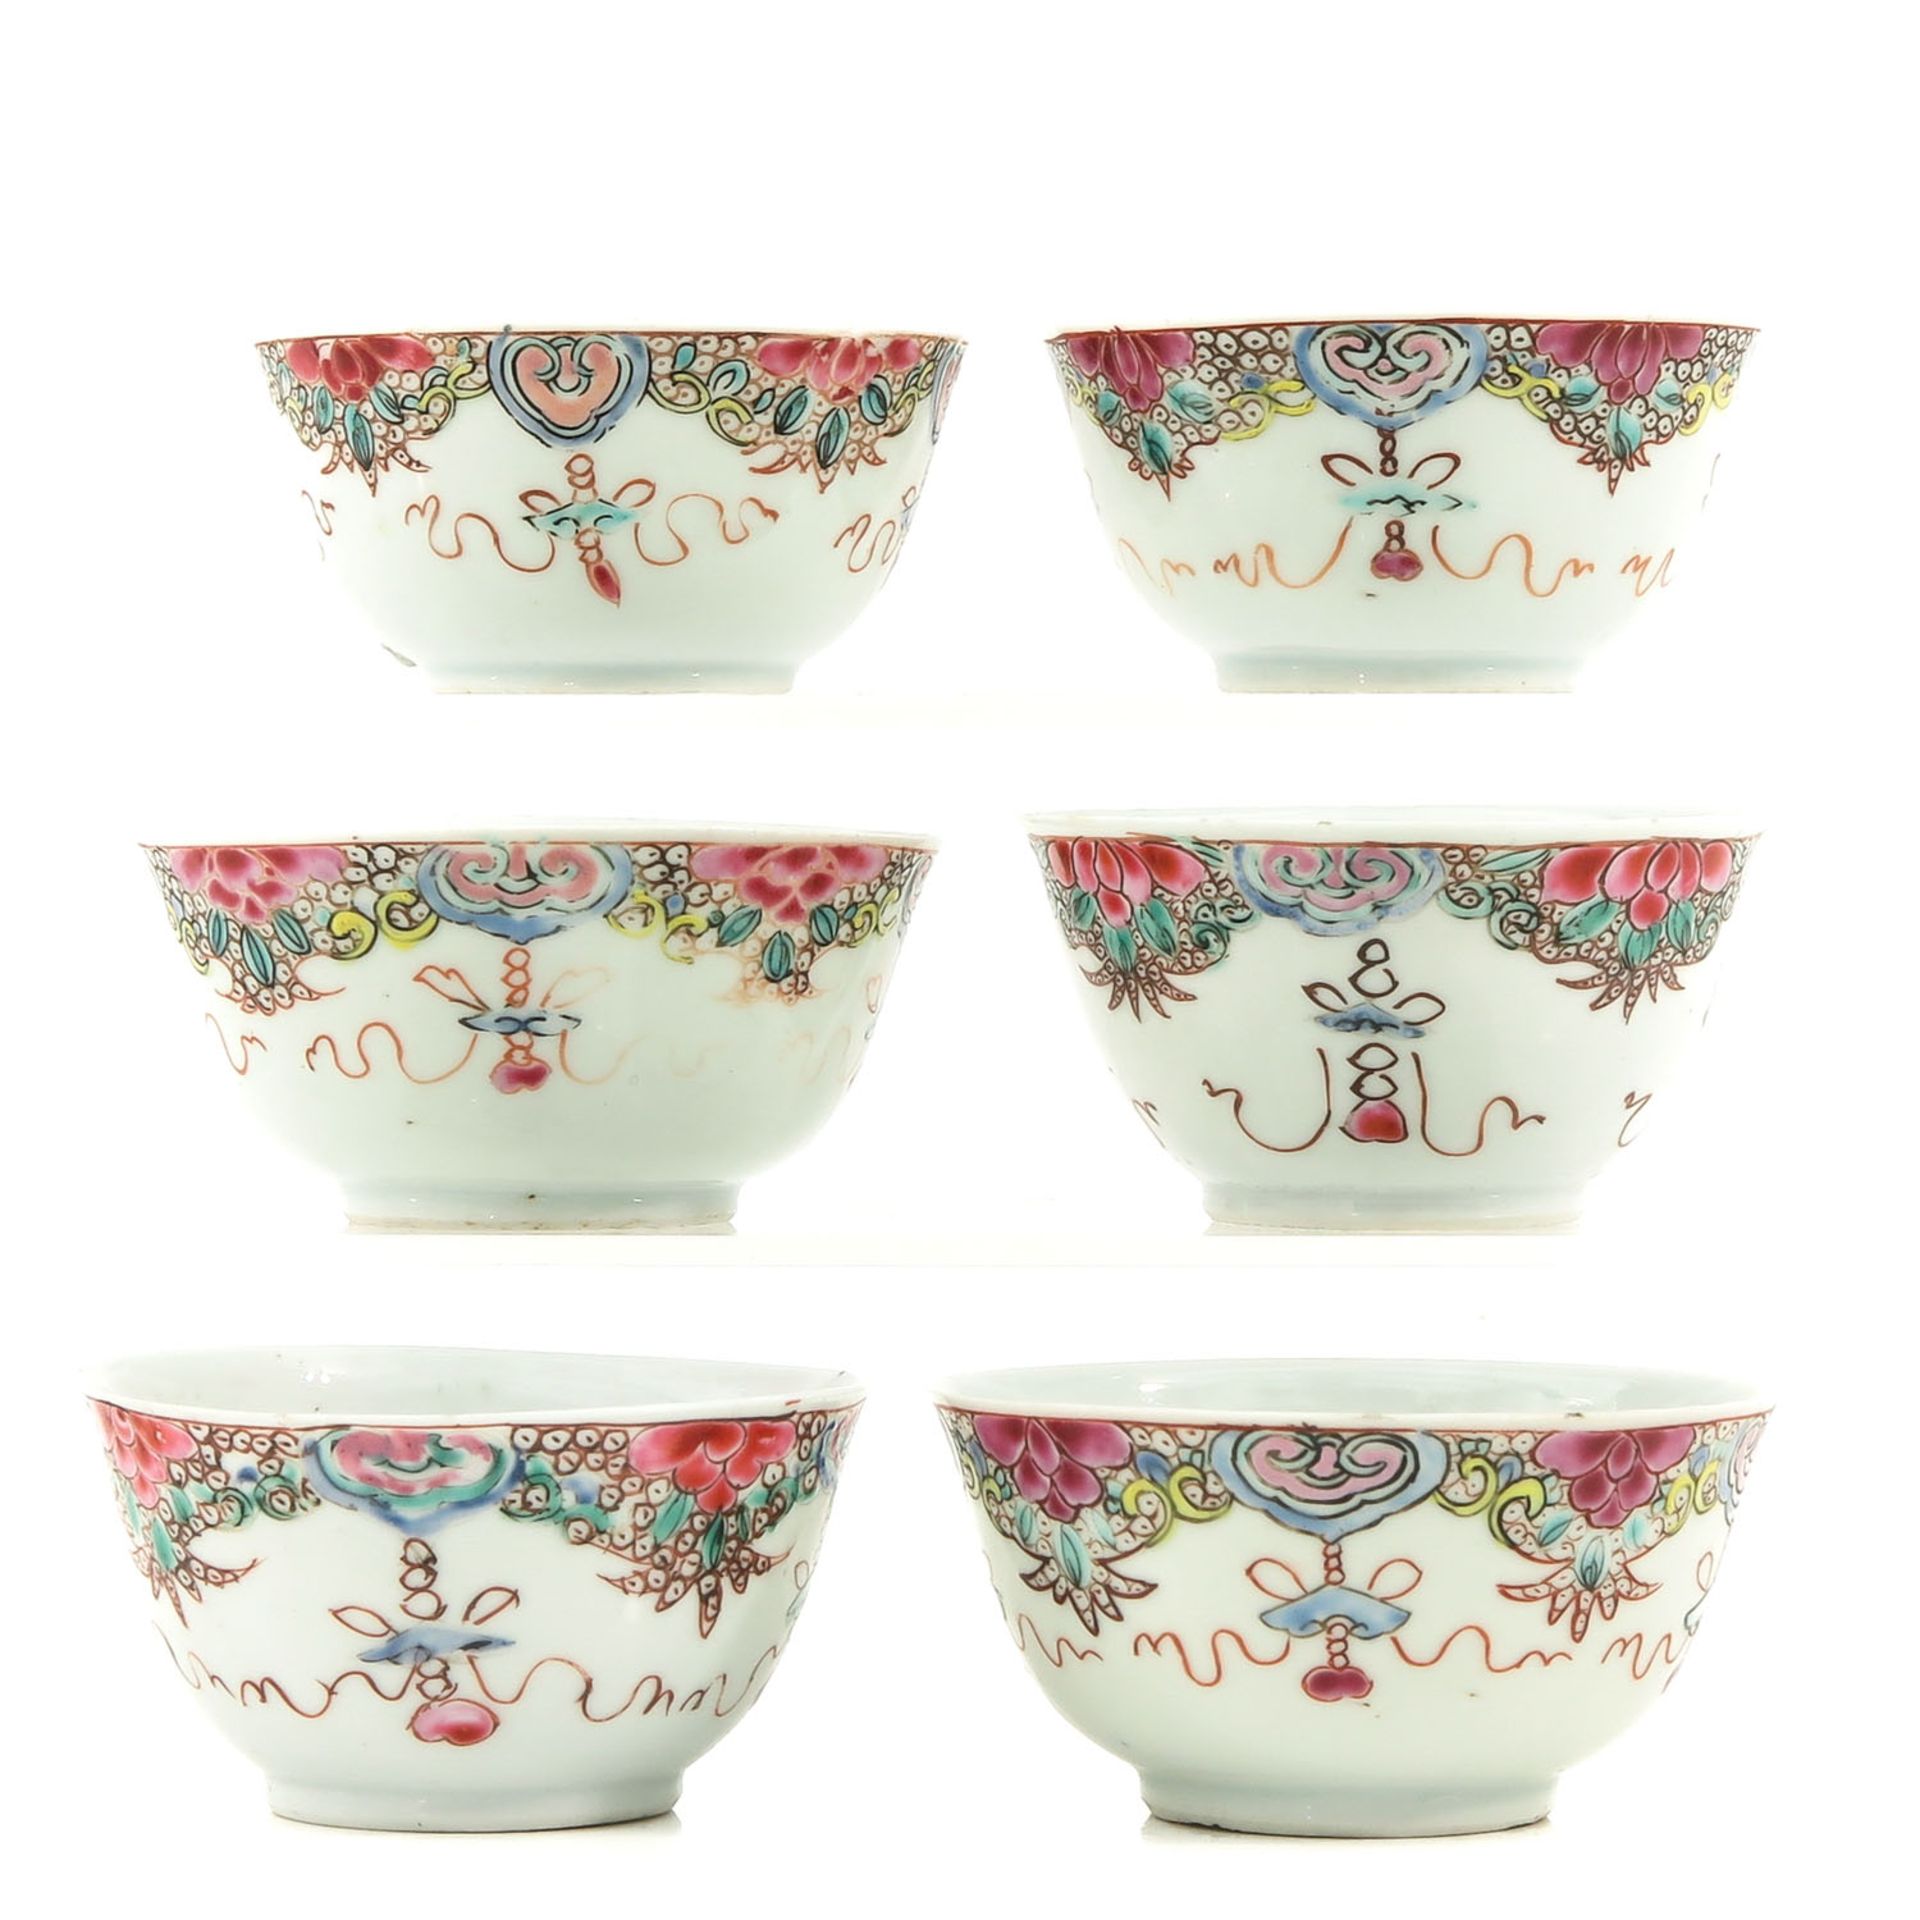 A Series of 6 Famille Rose Cups and Saucers - Image 2 of 10